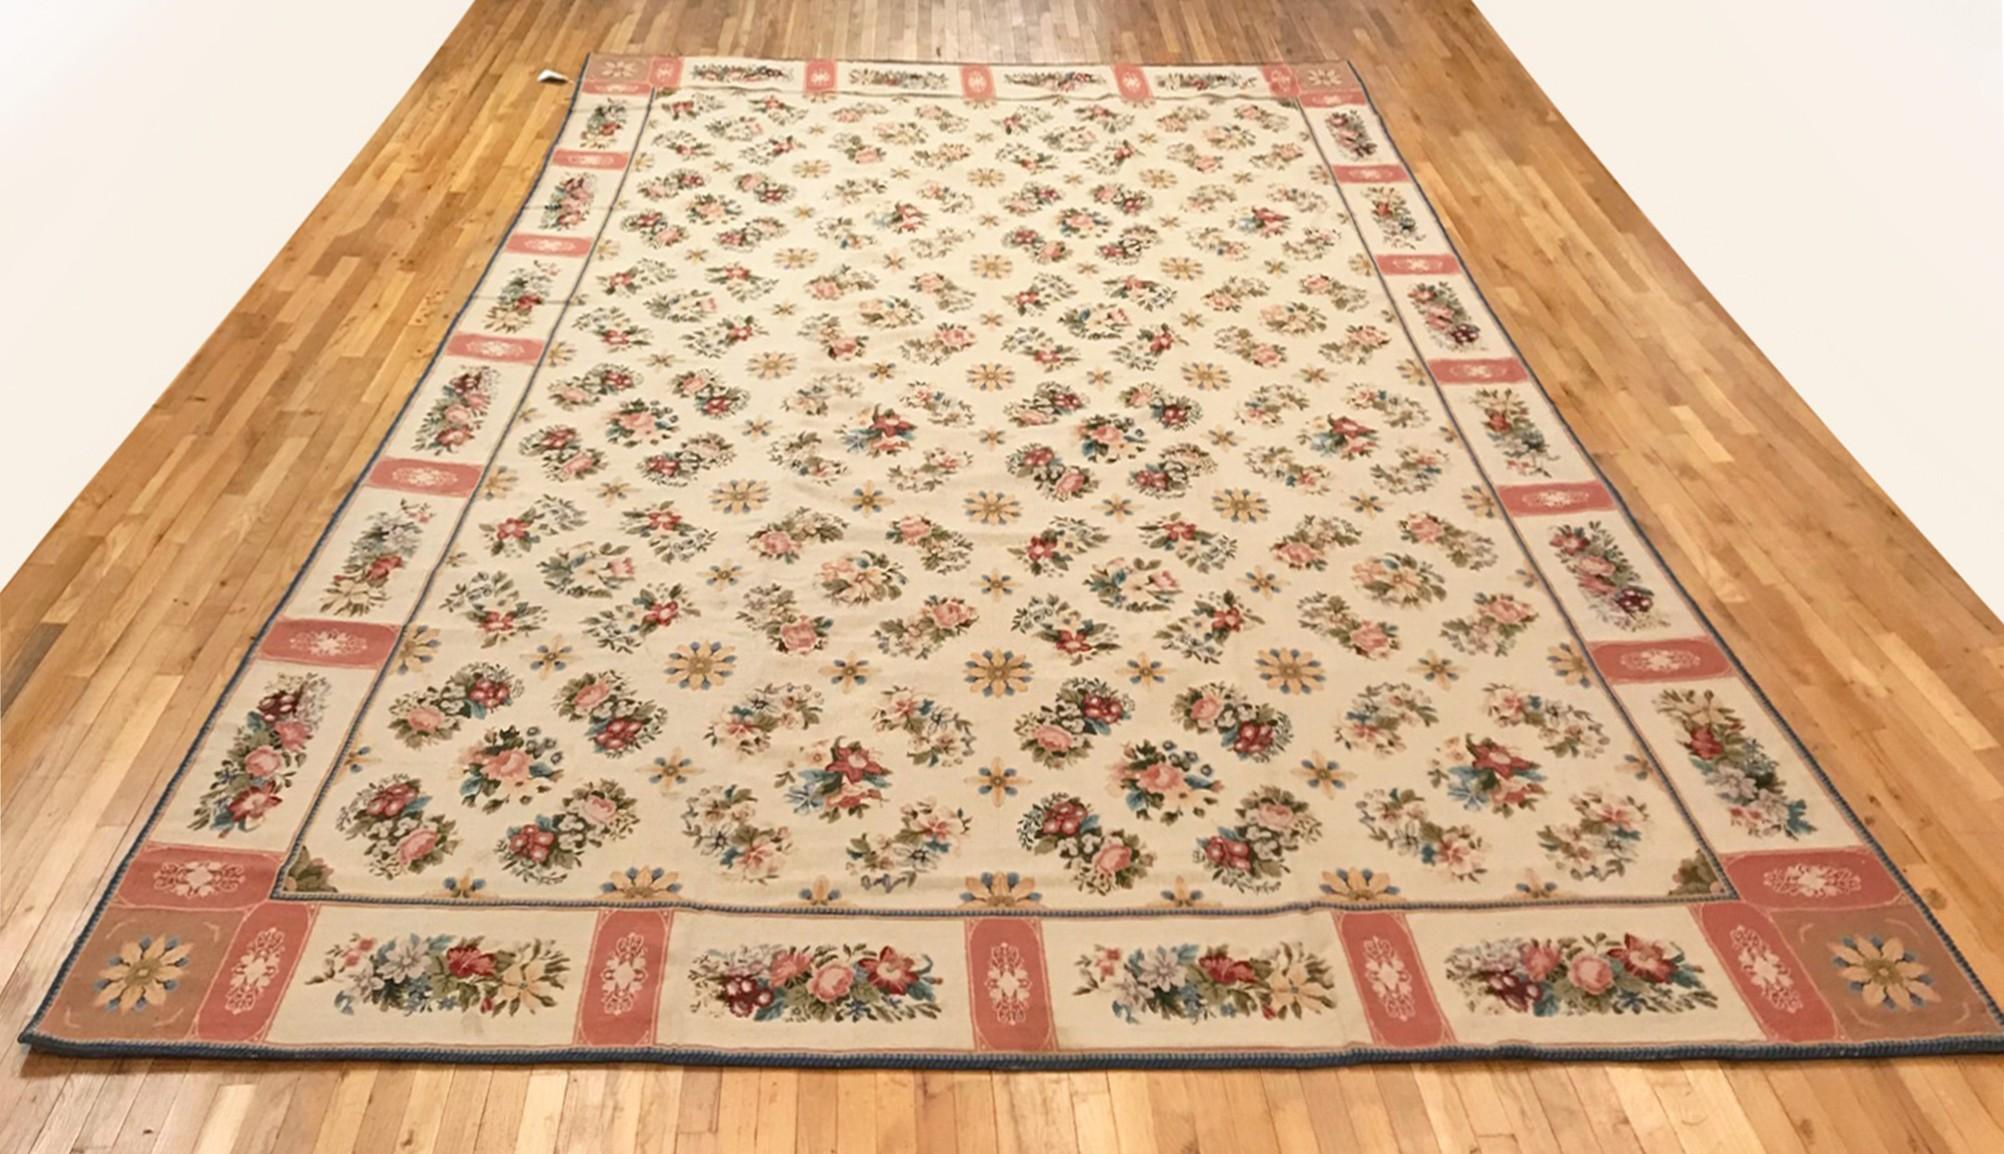 Antique Continental Needlepoint Rug, in Large size, circa 1900.

A one-of-a-kind antique Continental needlepoint rug, hand-knotted with soft wool pile. This lovely hand-knotted rug features a repeating floral design allover the ivory central